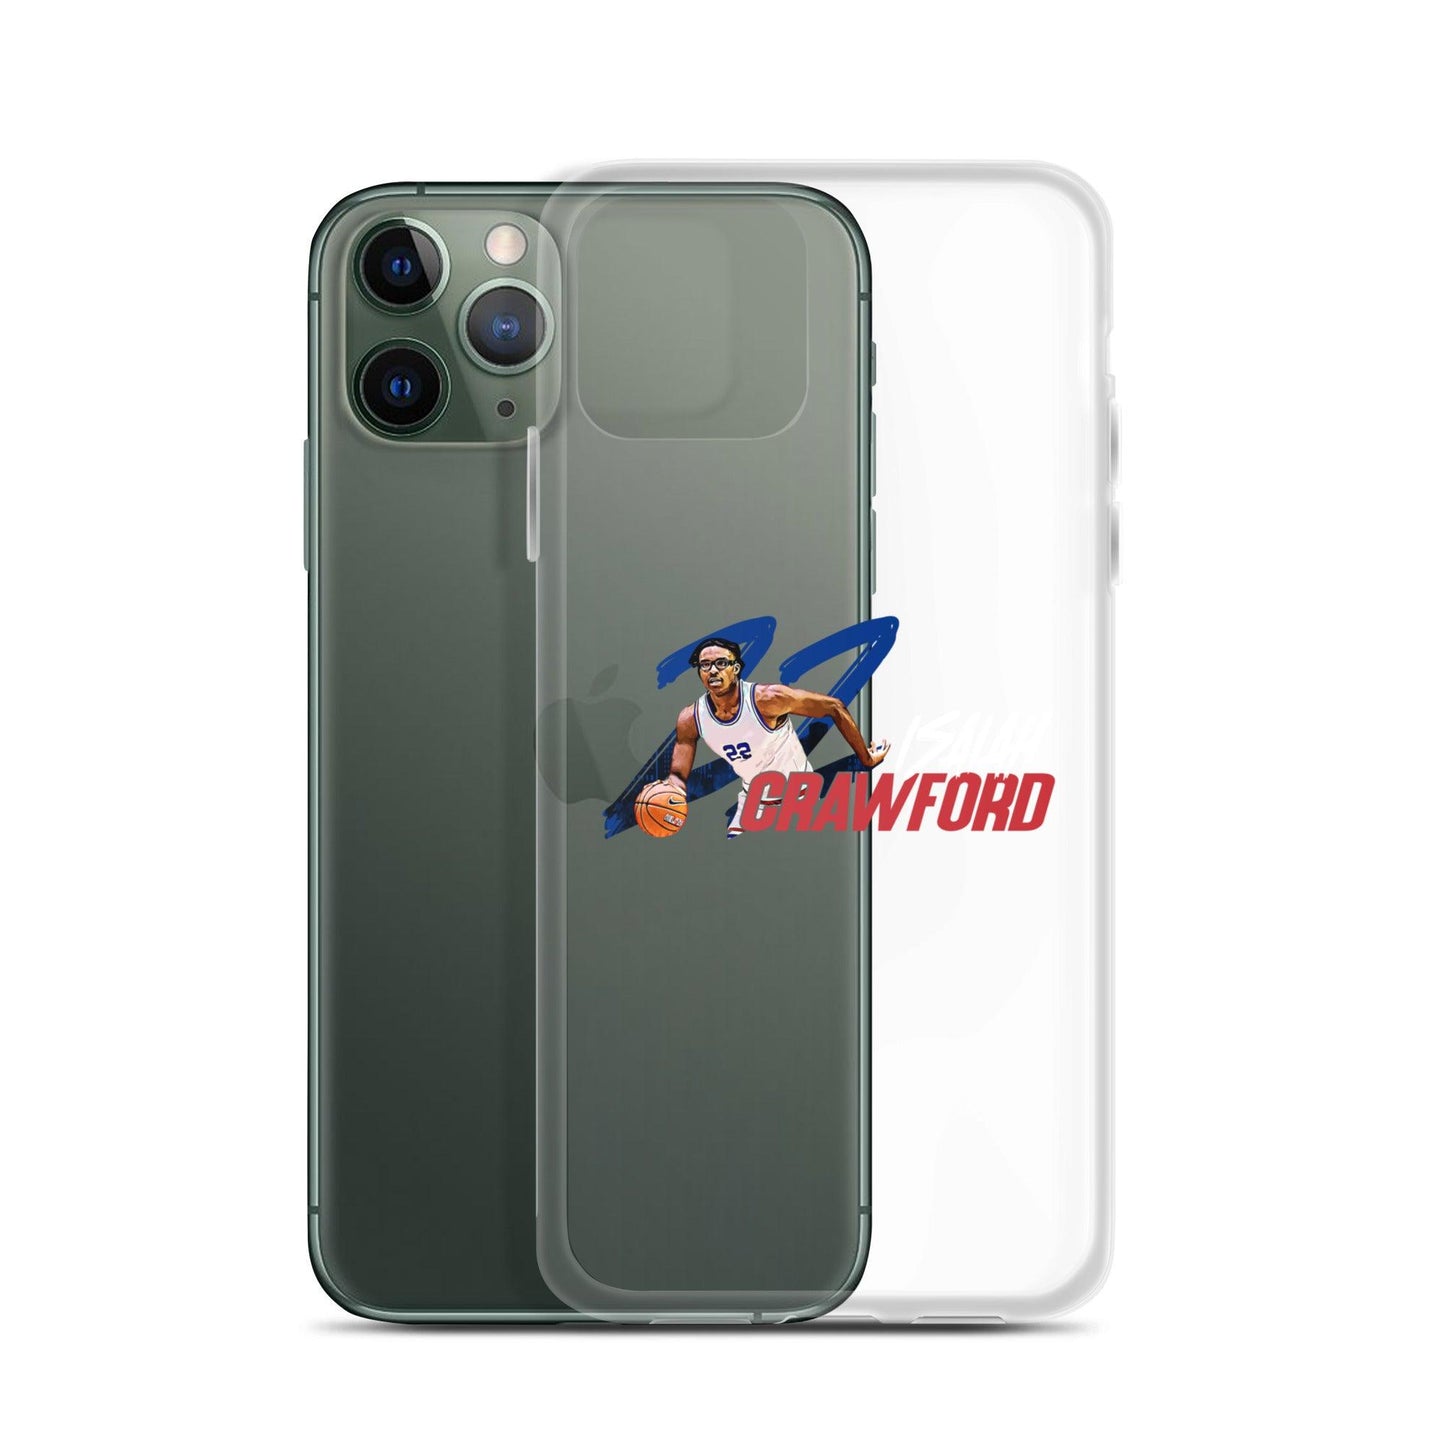 Isaiah Crawford "Gameday" iPhone Case - Fan Arch